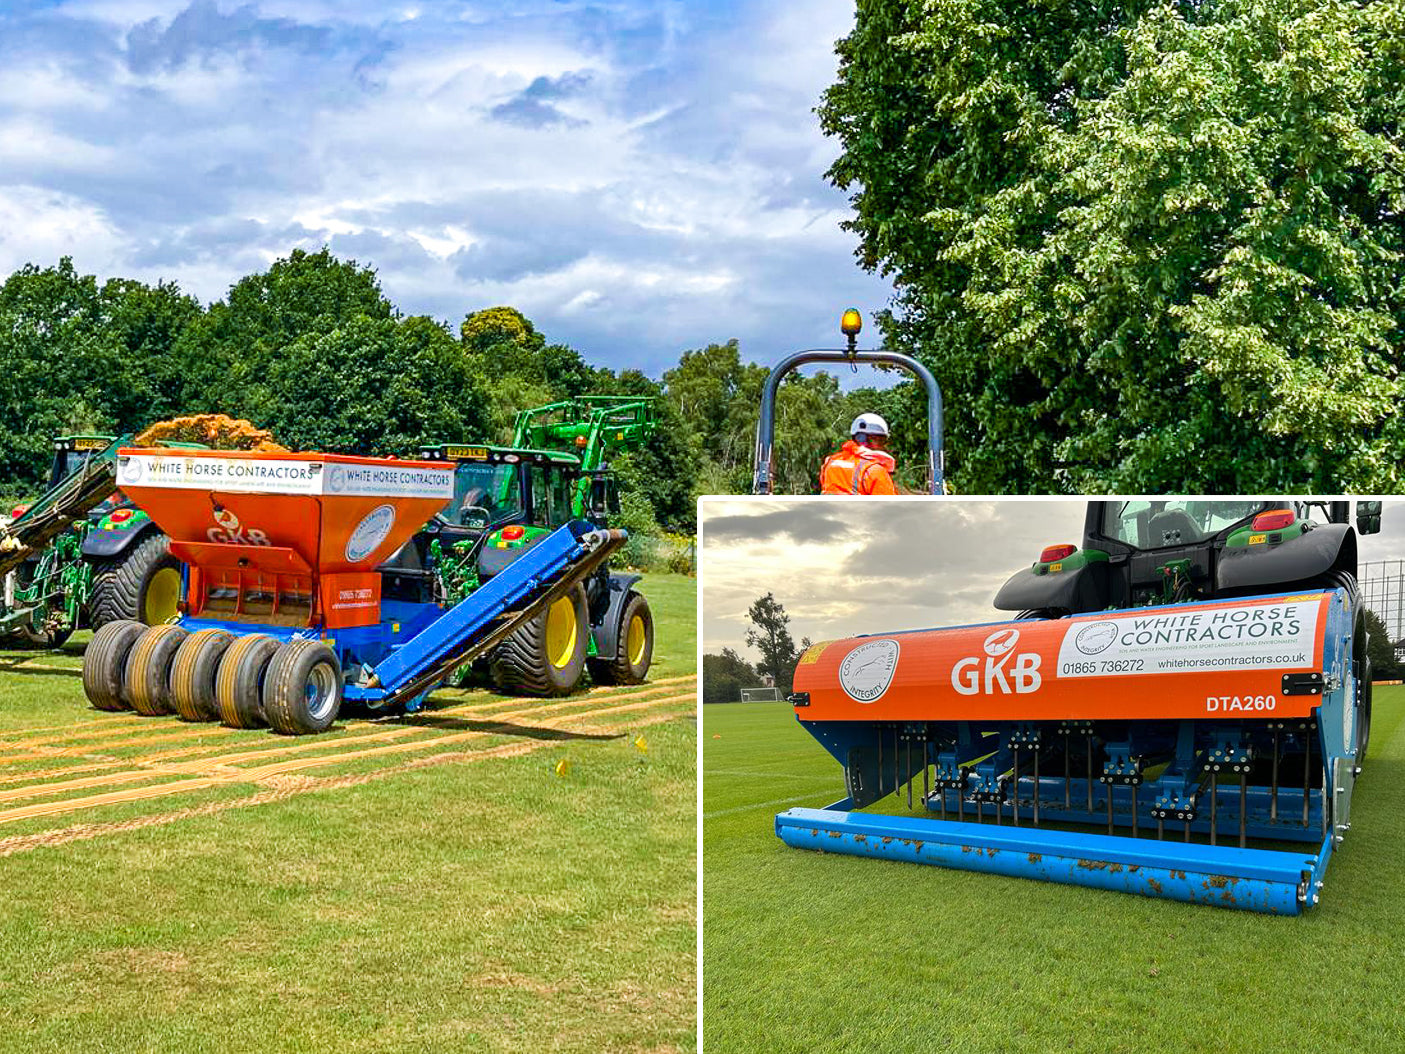 GKB delivers the secondary drainage solutions for White Horse Contractors